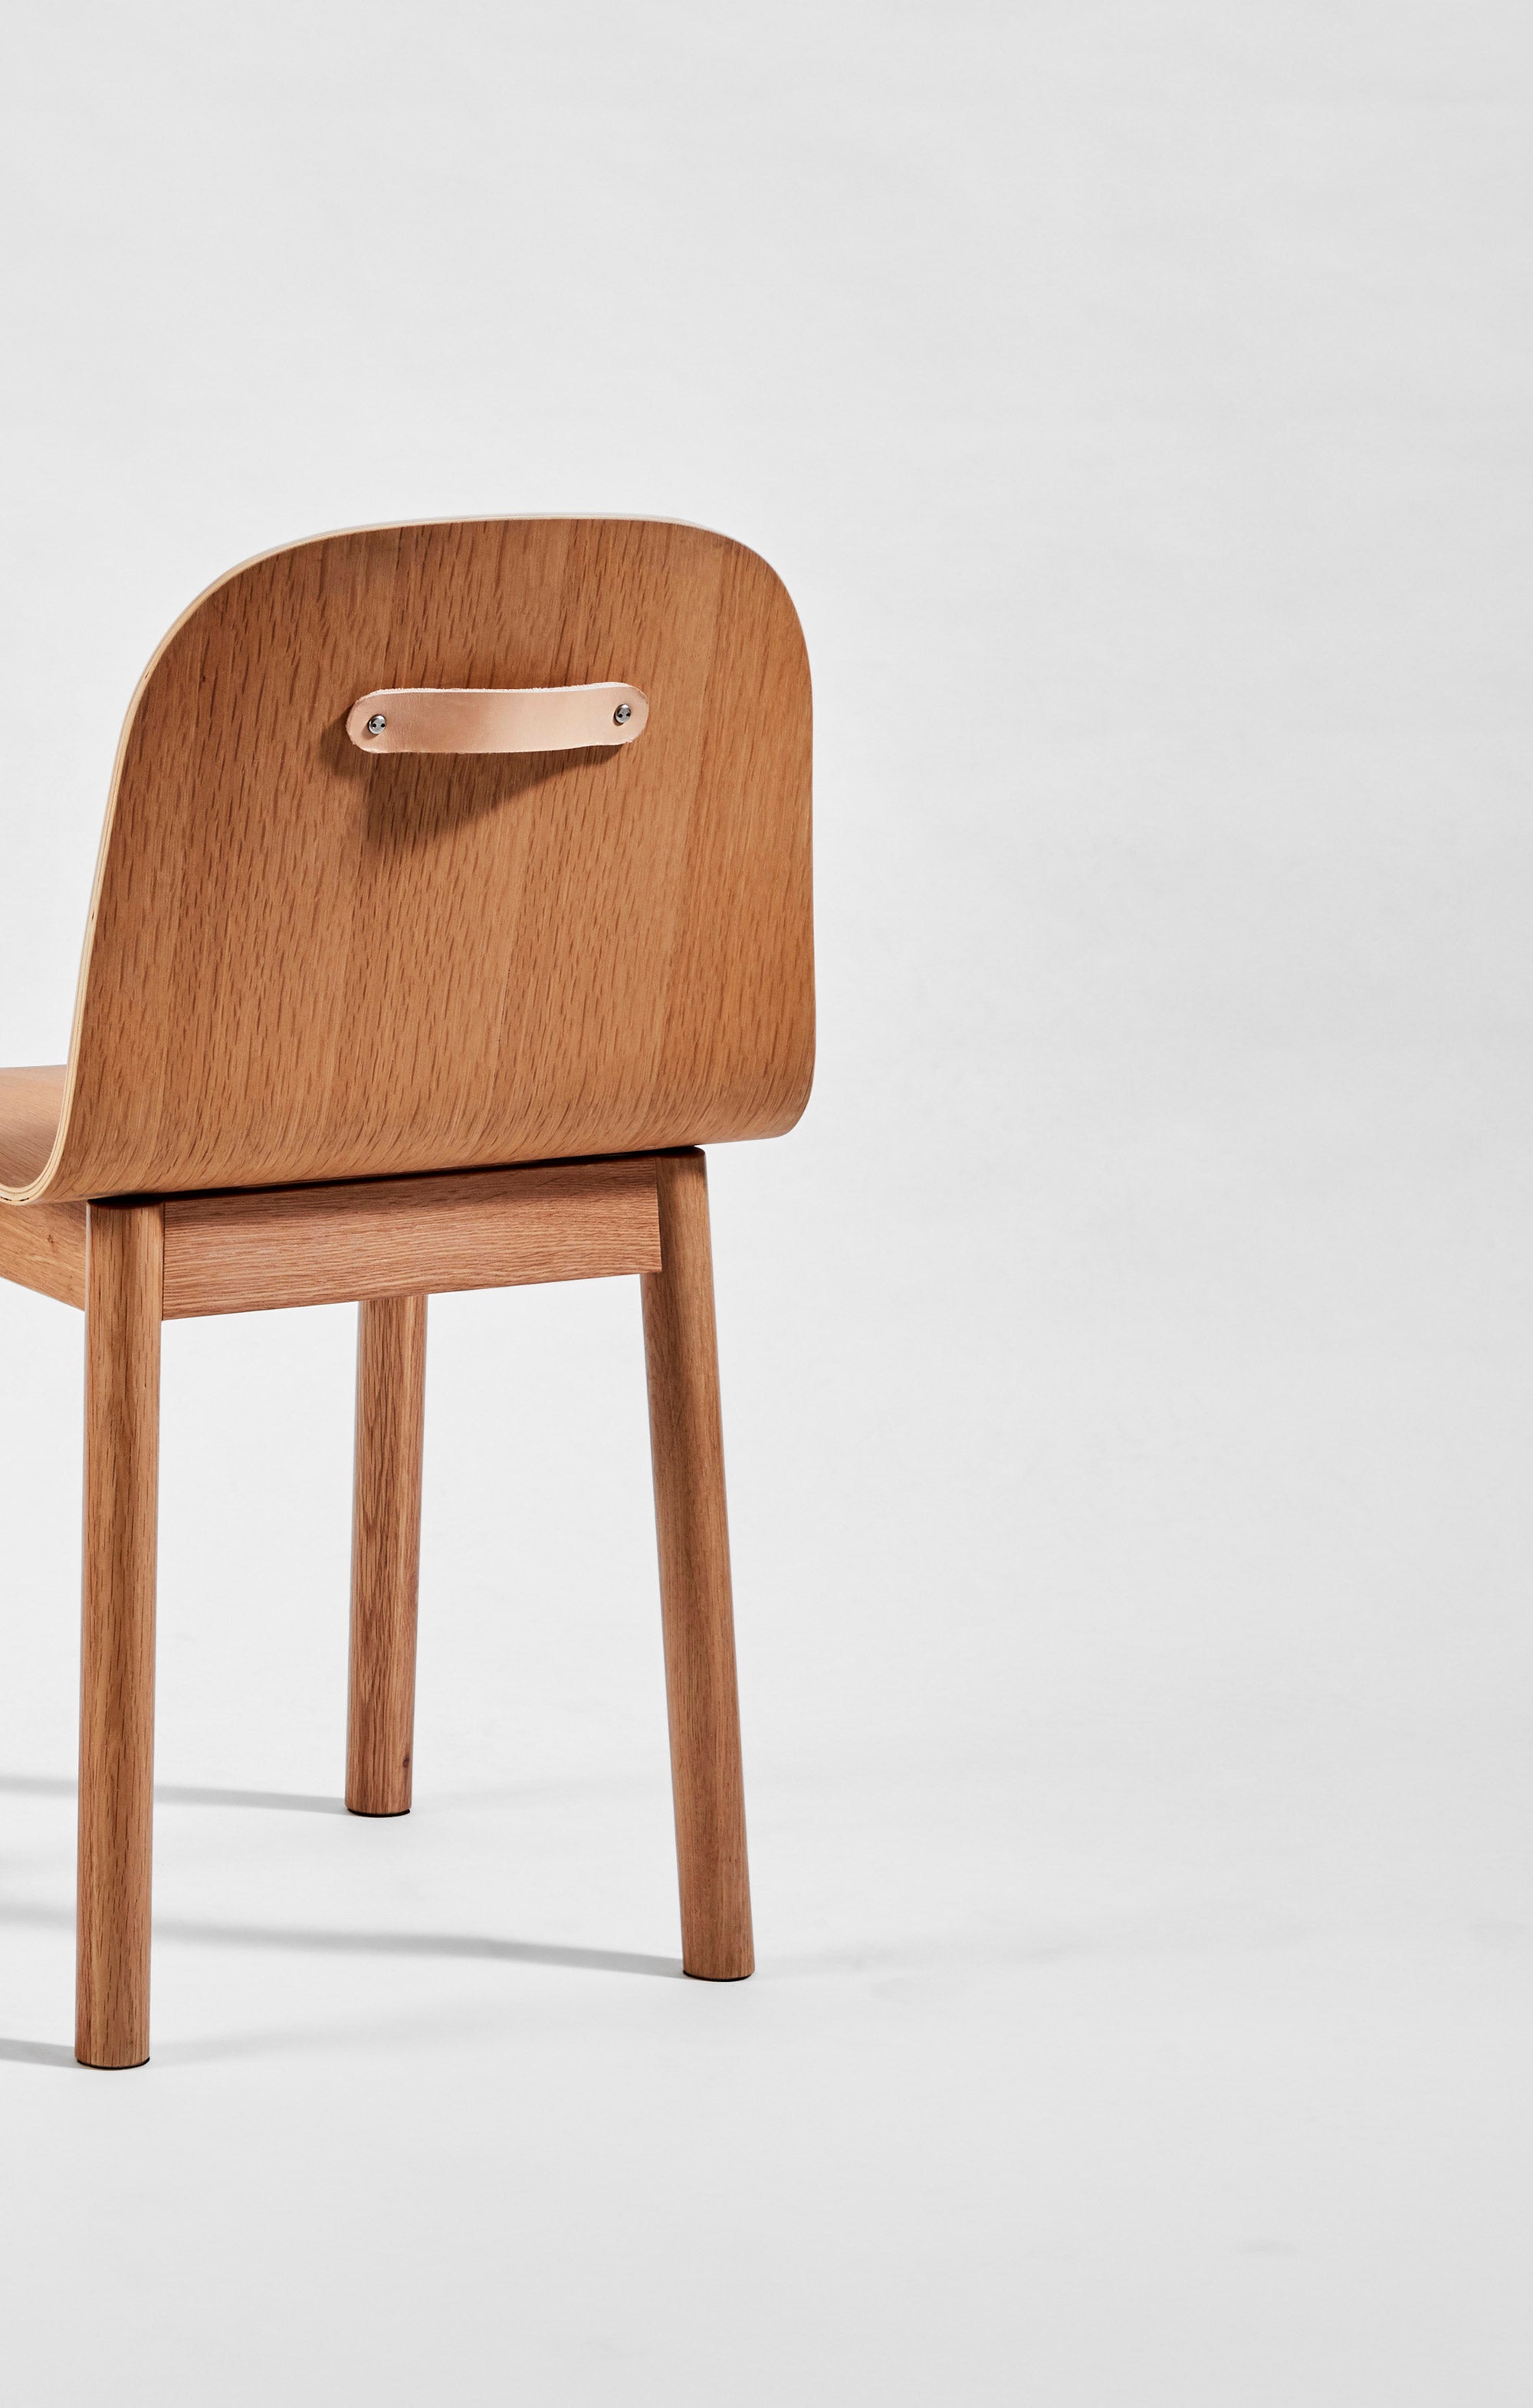 Potato Chair | Timber Dining Office Chair with Handle | GibsonKarlo | DesignByThem